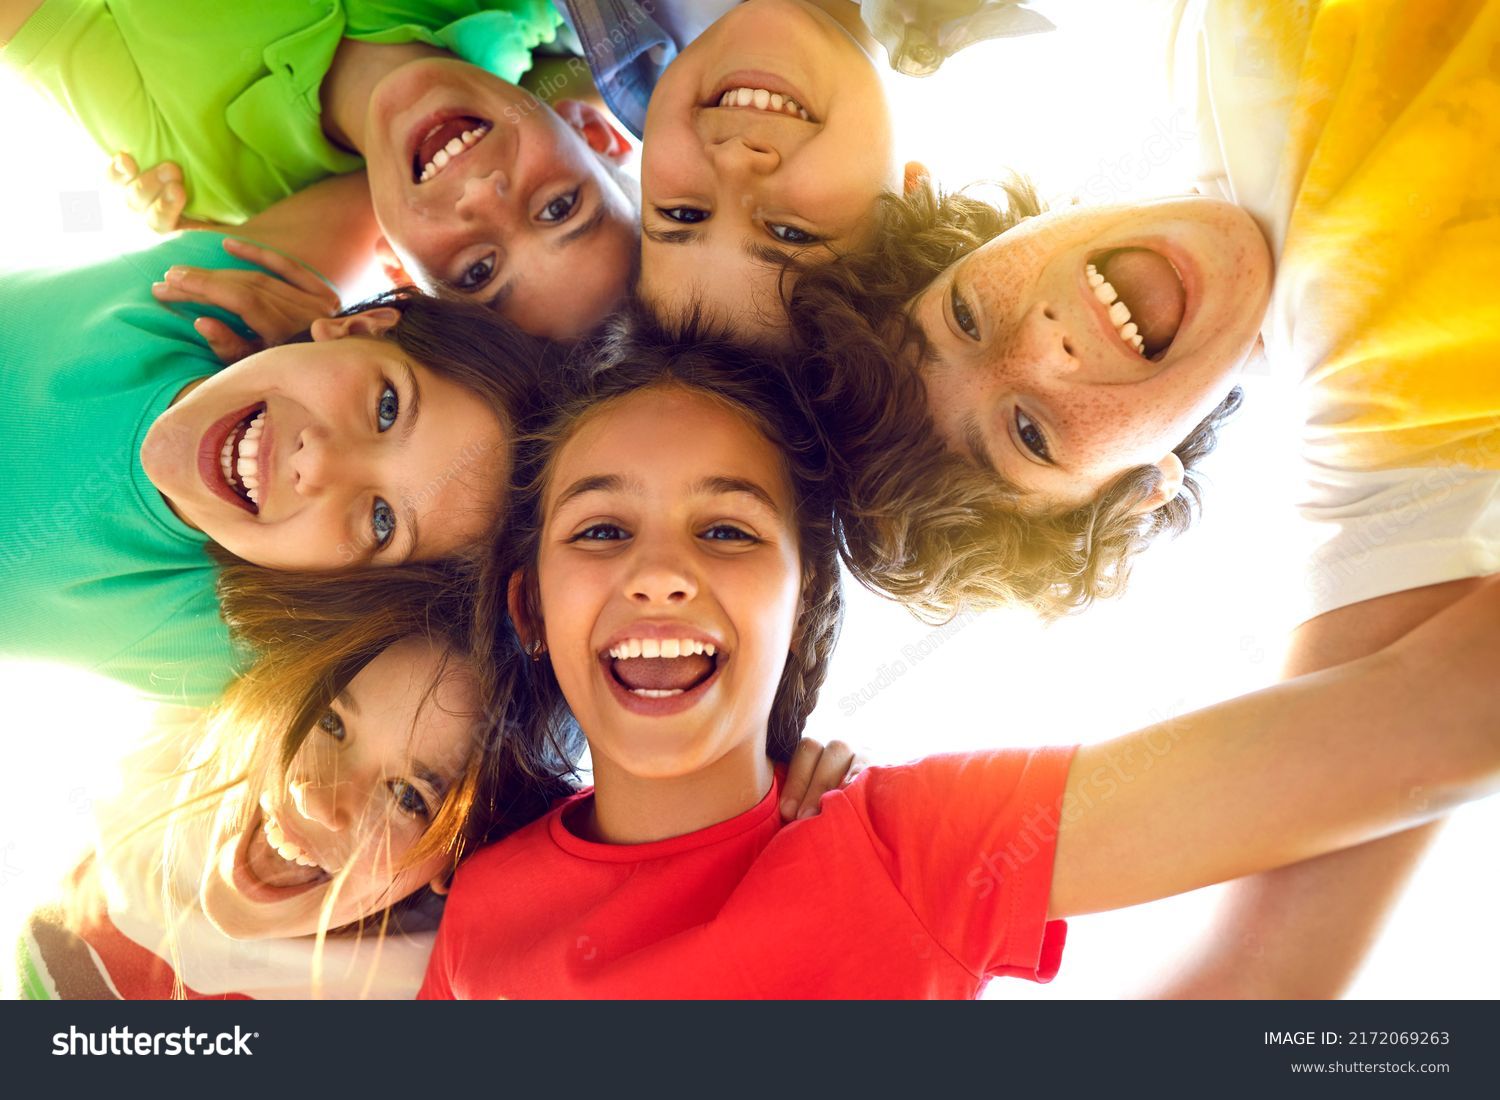 Bunch of cheerful joyful cute little children playing together and having fun. Group portrait of happy kids huddling, looking down at camera and smiling. Low angle, view from below. Friendship concept #2172069263